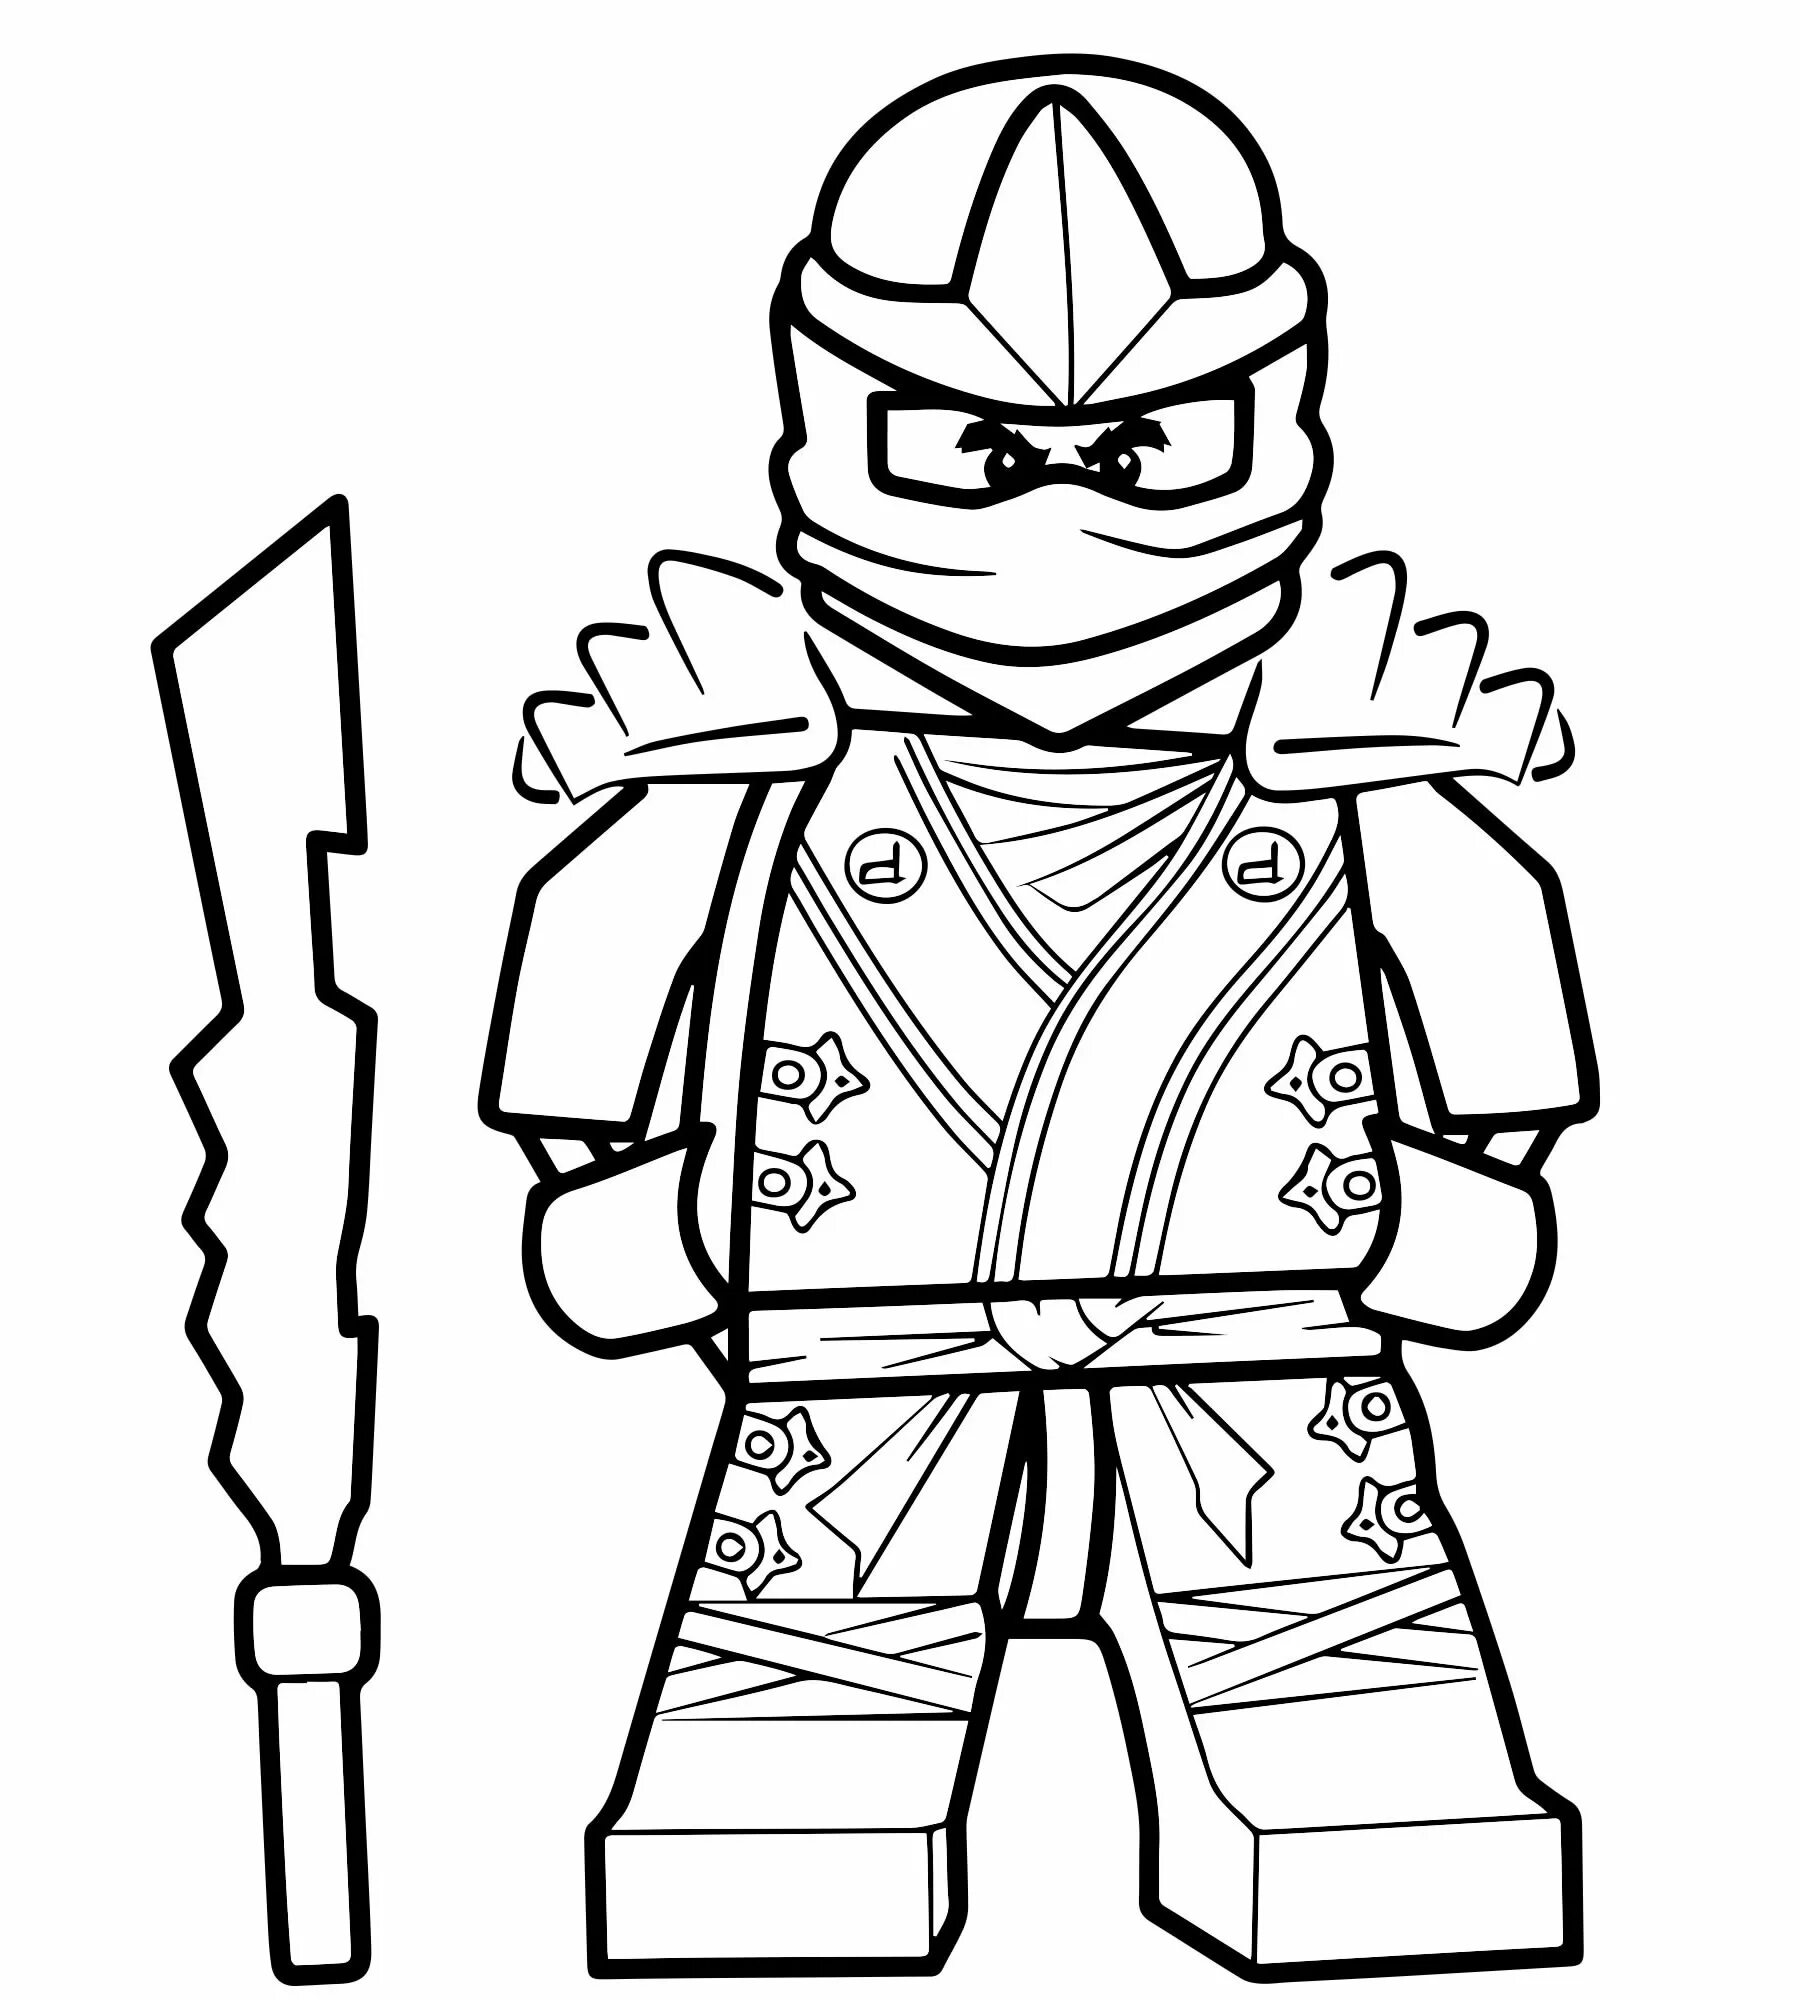 Awesome ninja coloring pages for boys